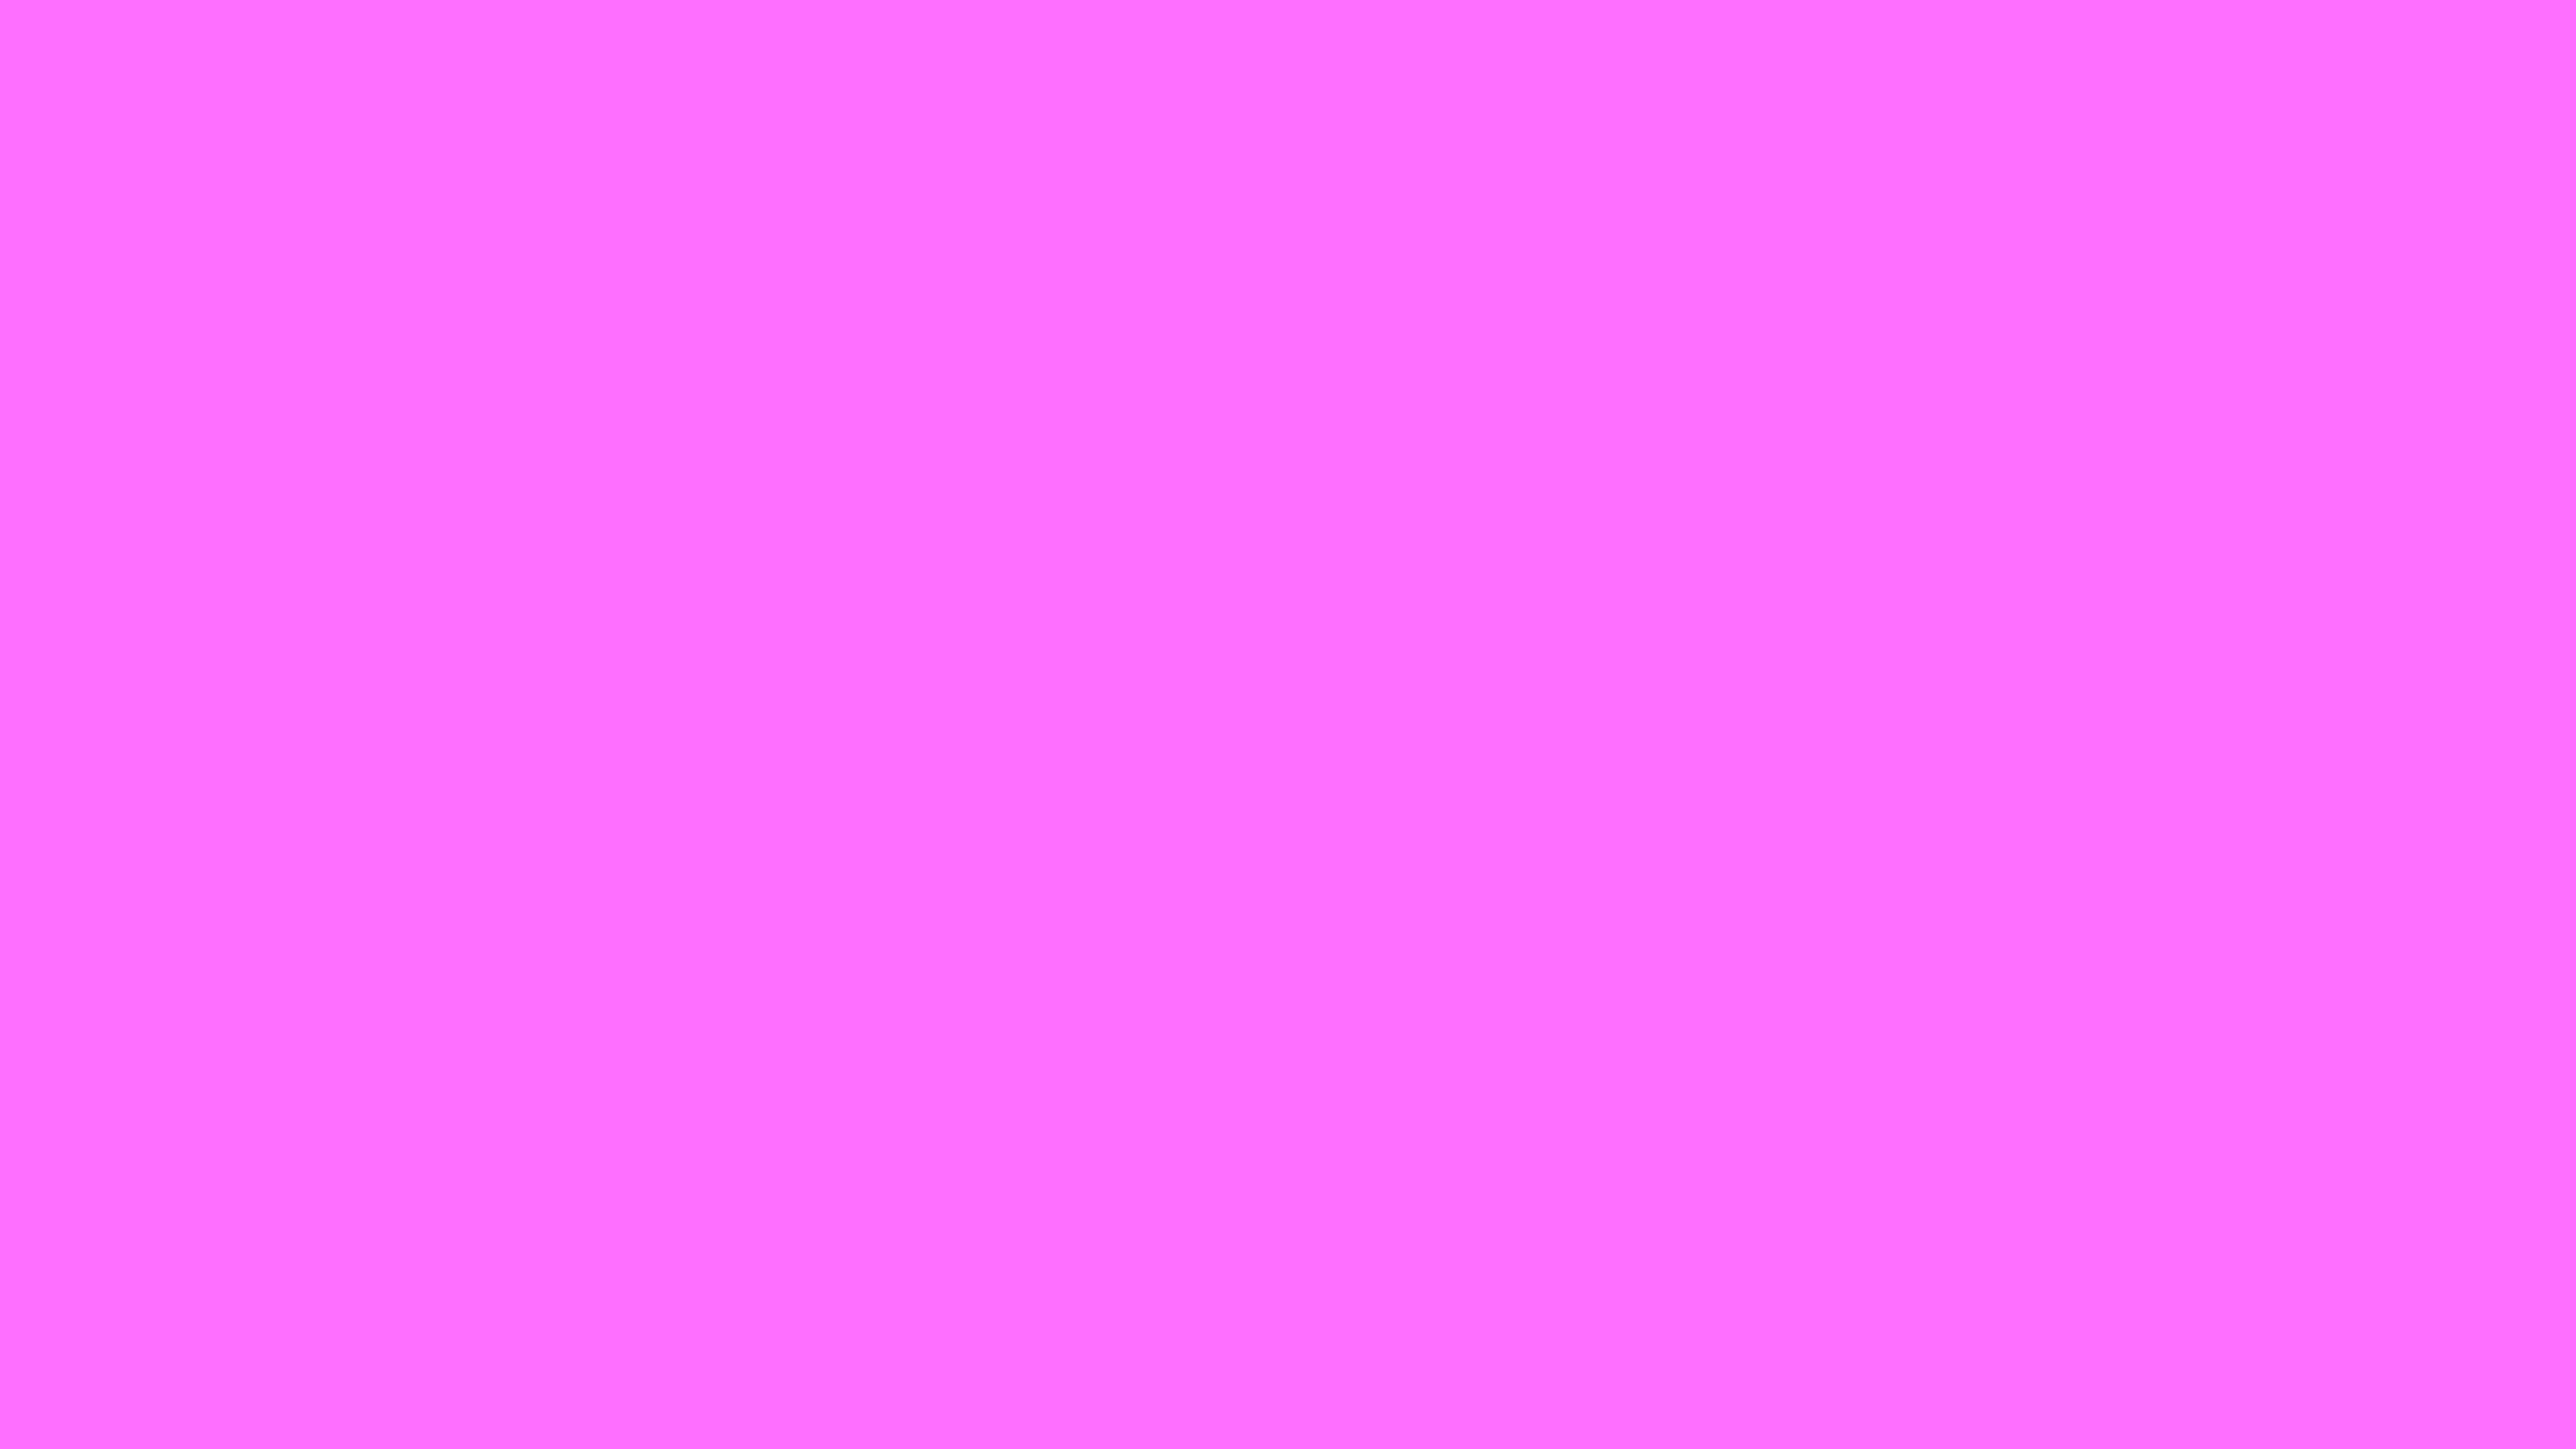 7680x4320 Ultra Pink Solid Color Background